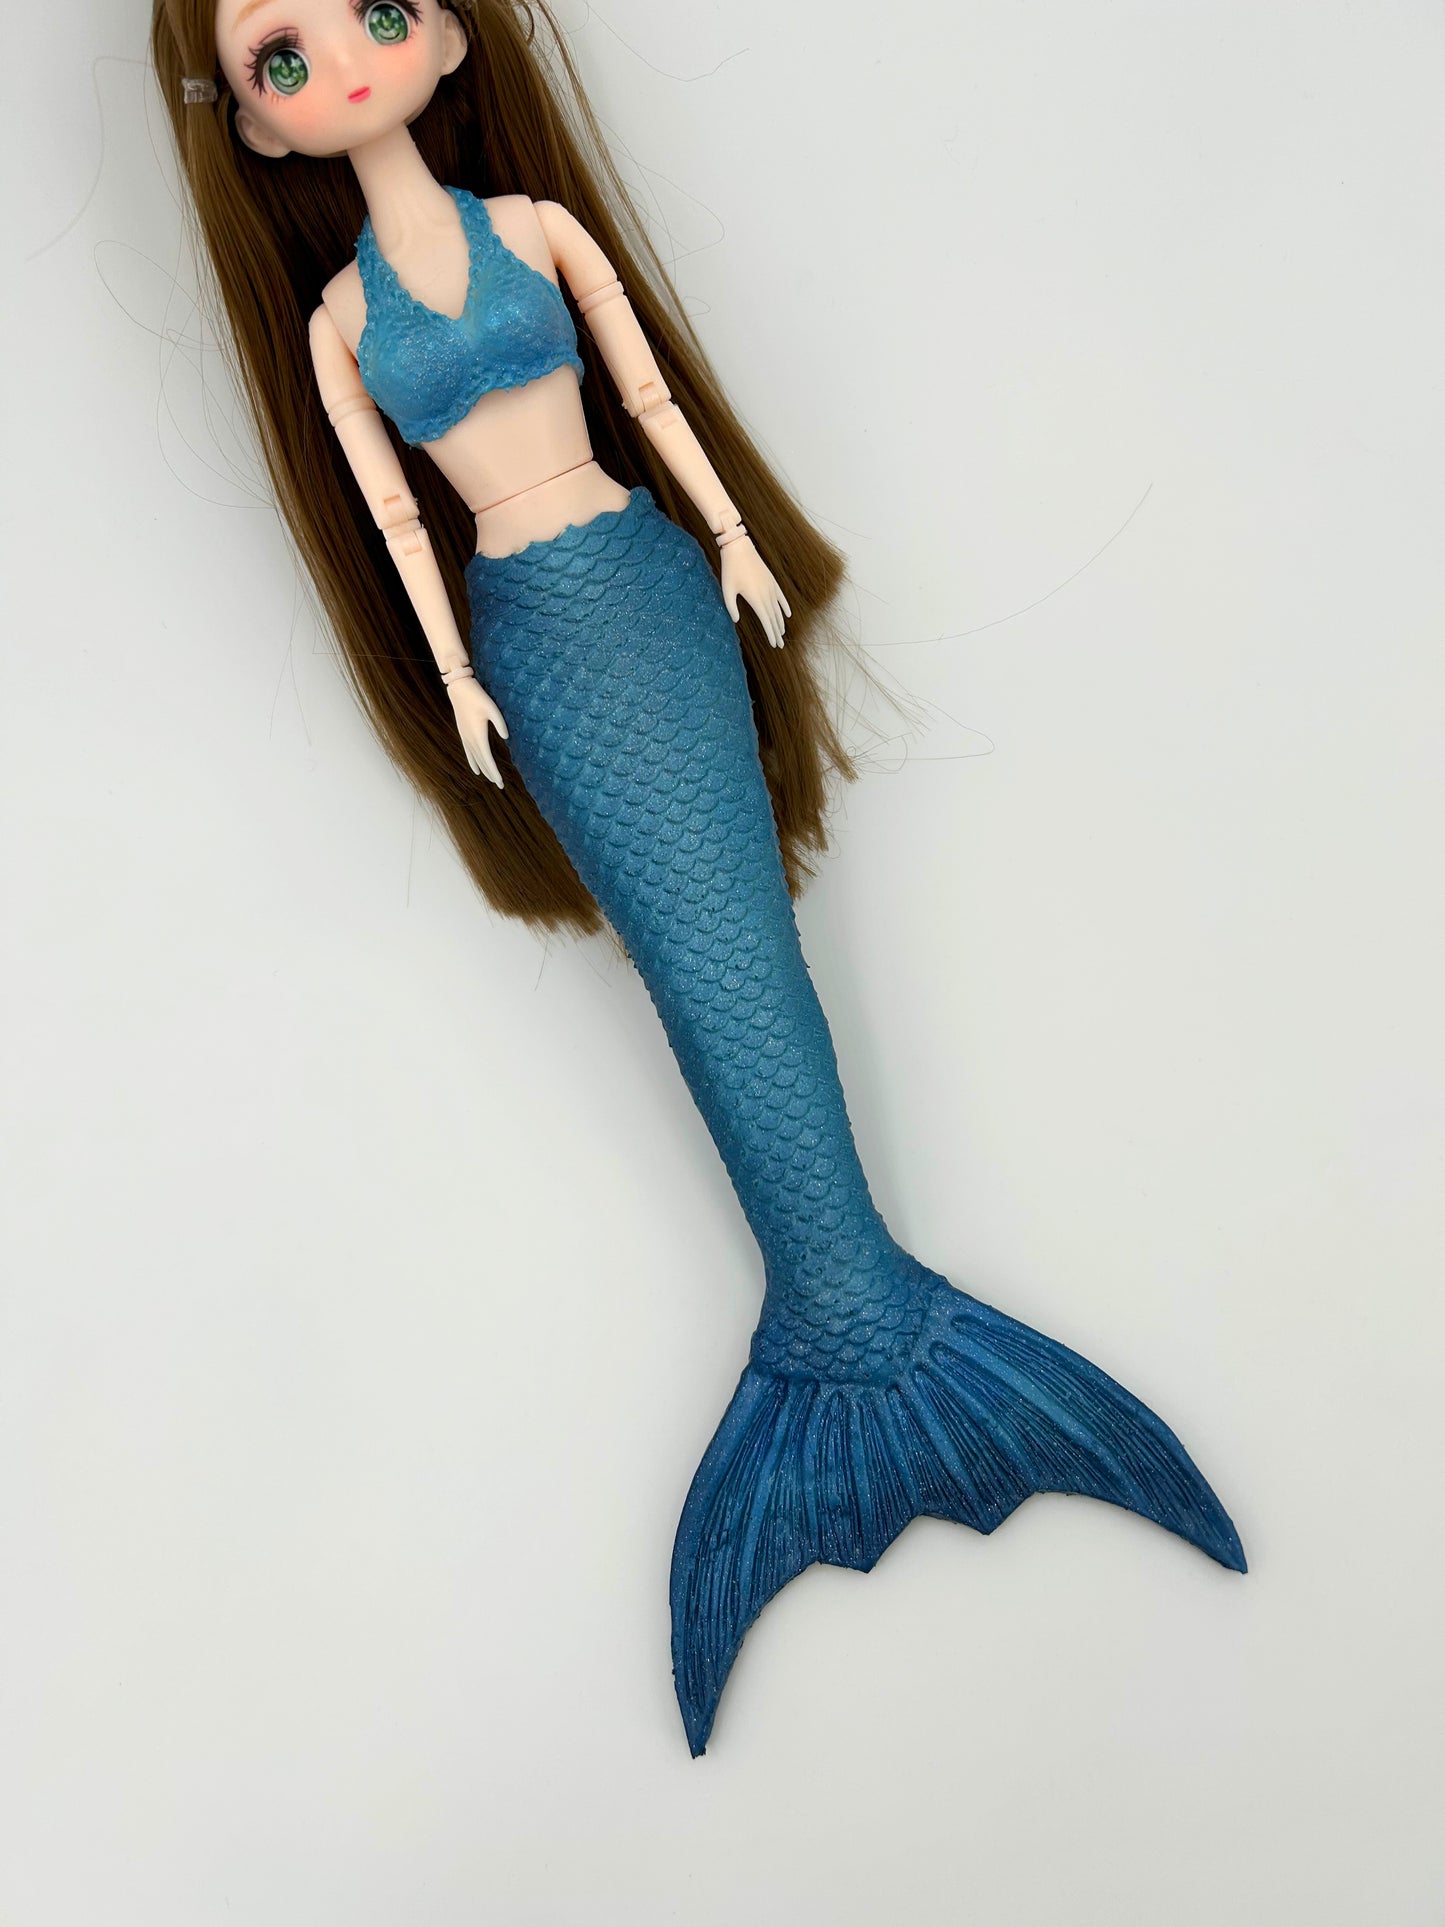 Zac silicone mermaid tail and bra for doll (doll not included)